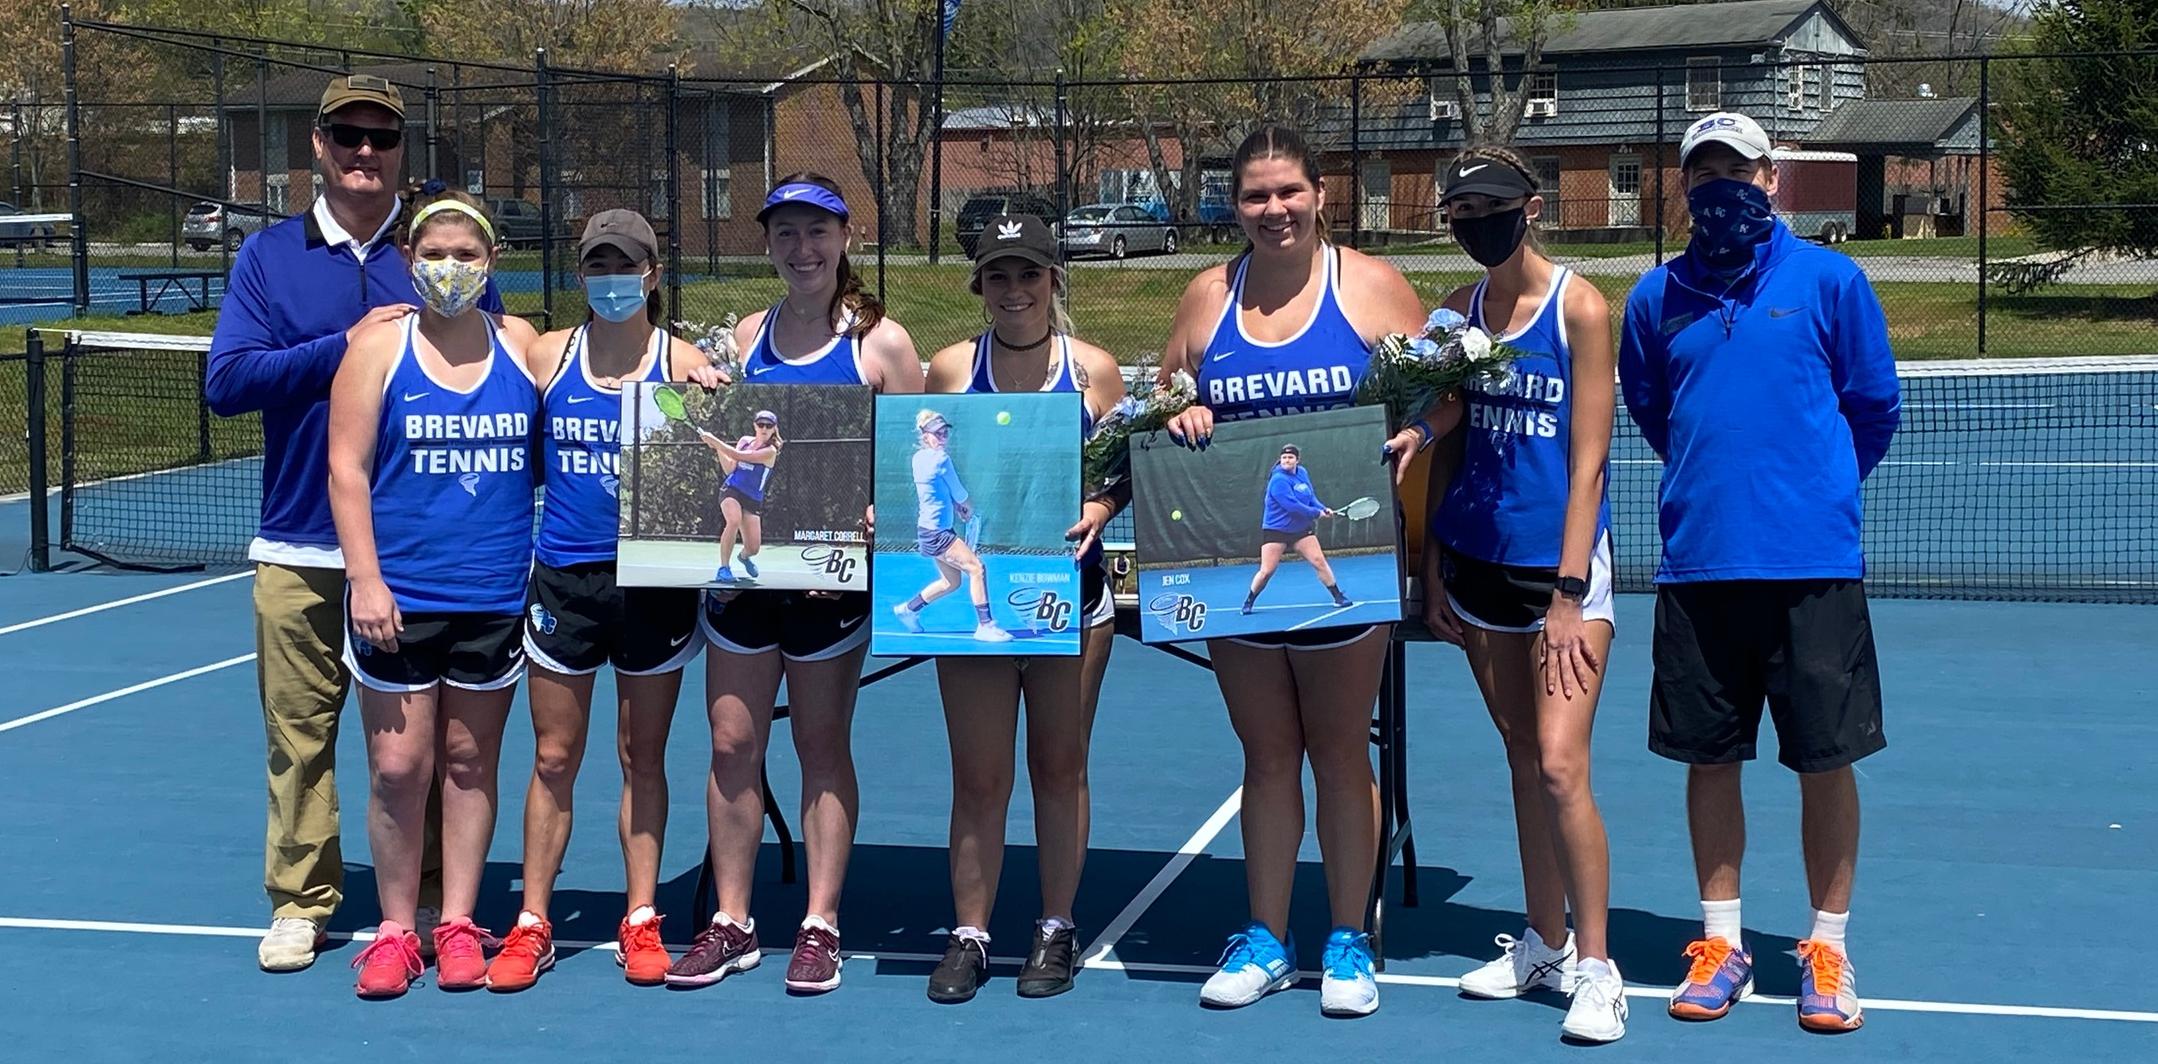 The 2021 Brevard College Women's Tennis senior class (Mekenzie Bowman, Margaret Correll, and Jen Cox) pictured with their teammates and coaches.